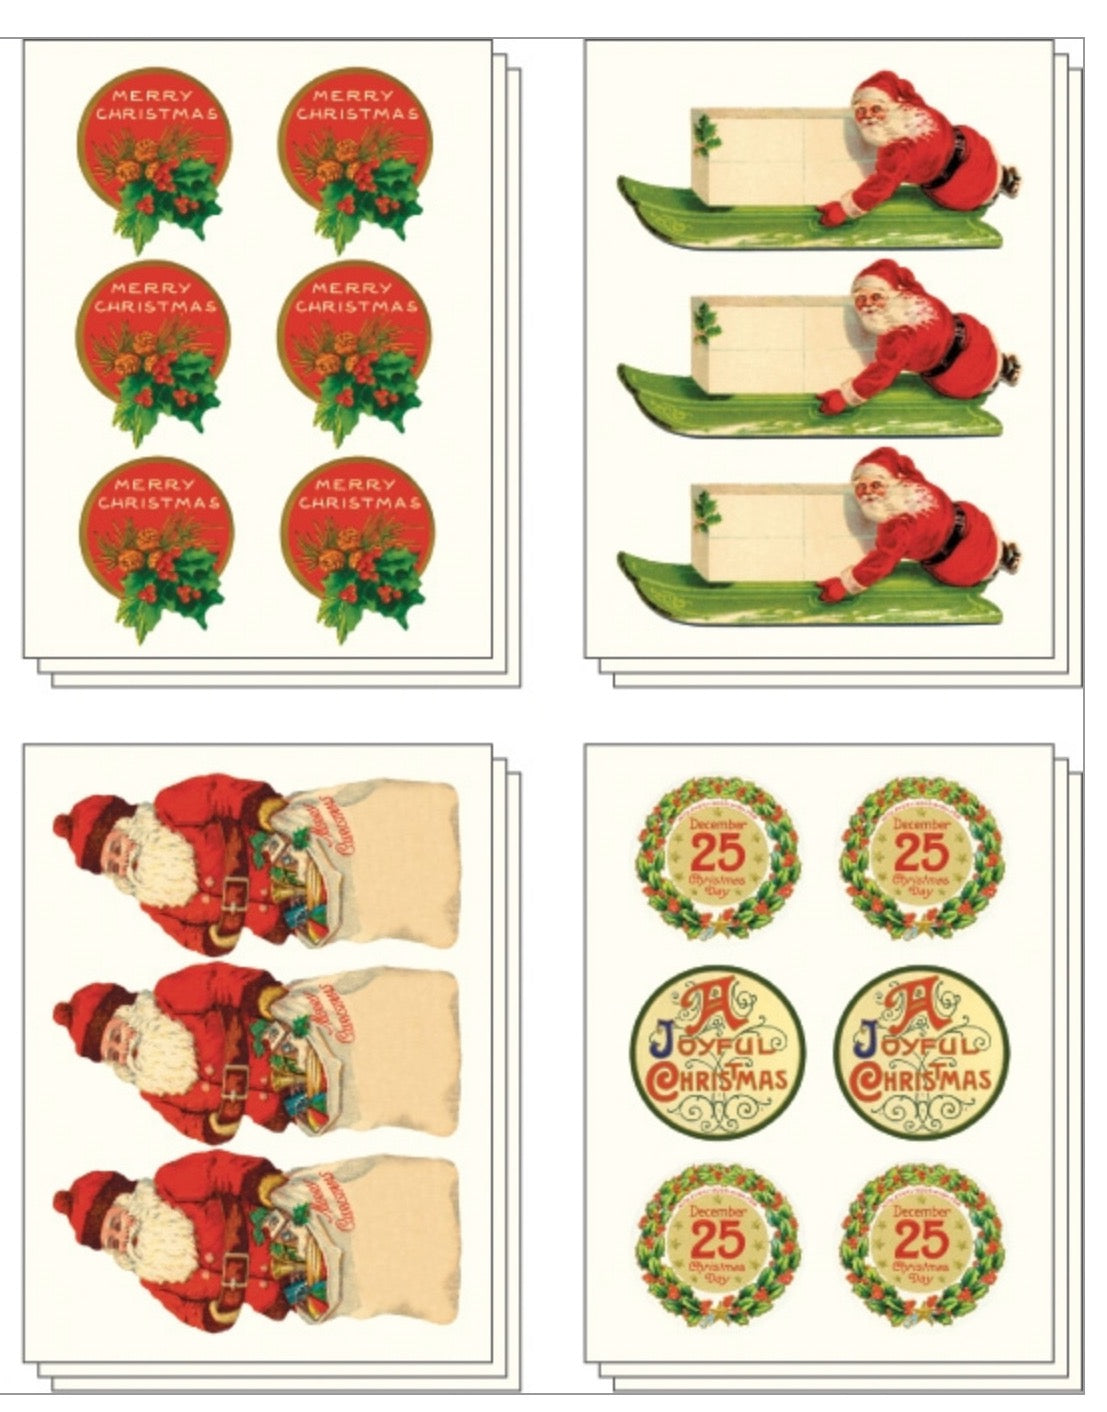 100+ Vintage-Style Christmas Stickers in Metal Tin - C